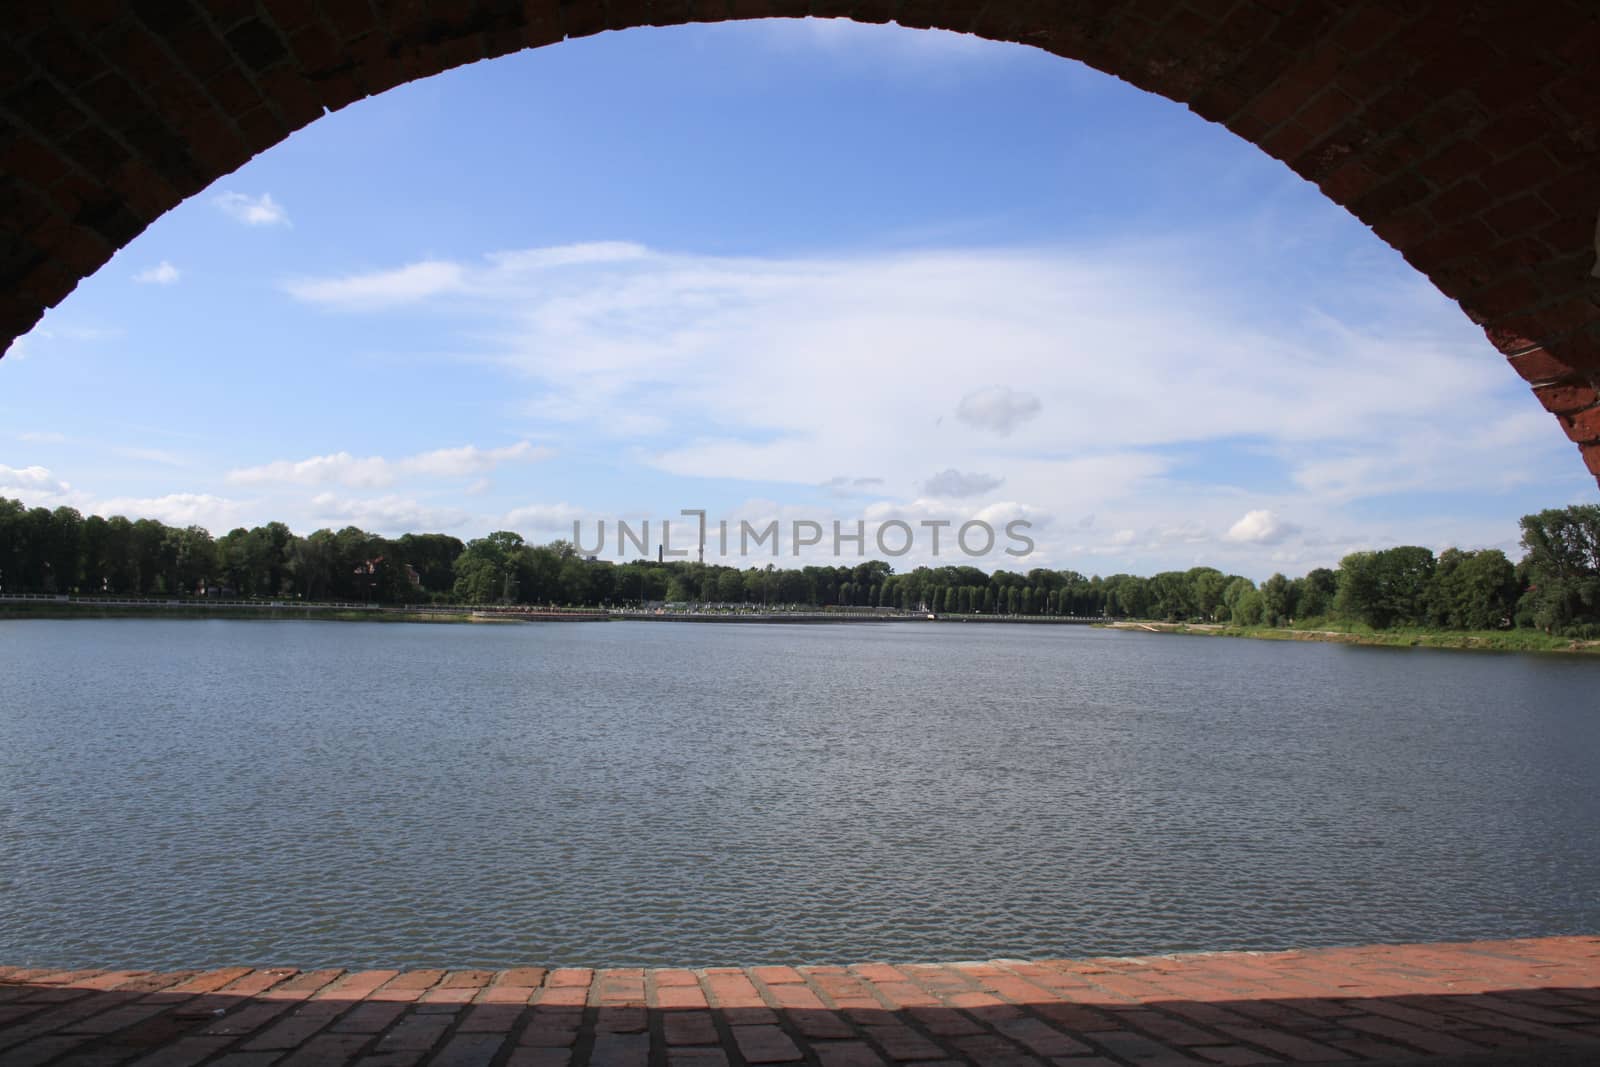 views of the Upper lake through the arch-defensive fortification complex in Kaliningrad